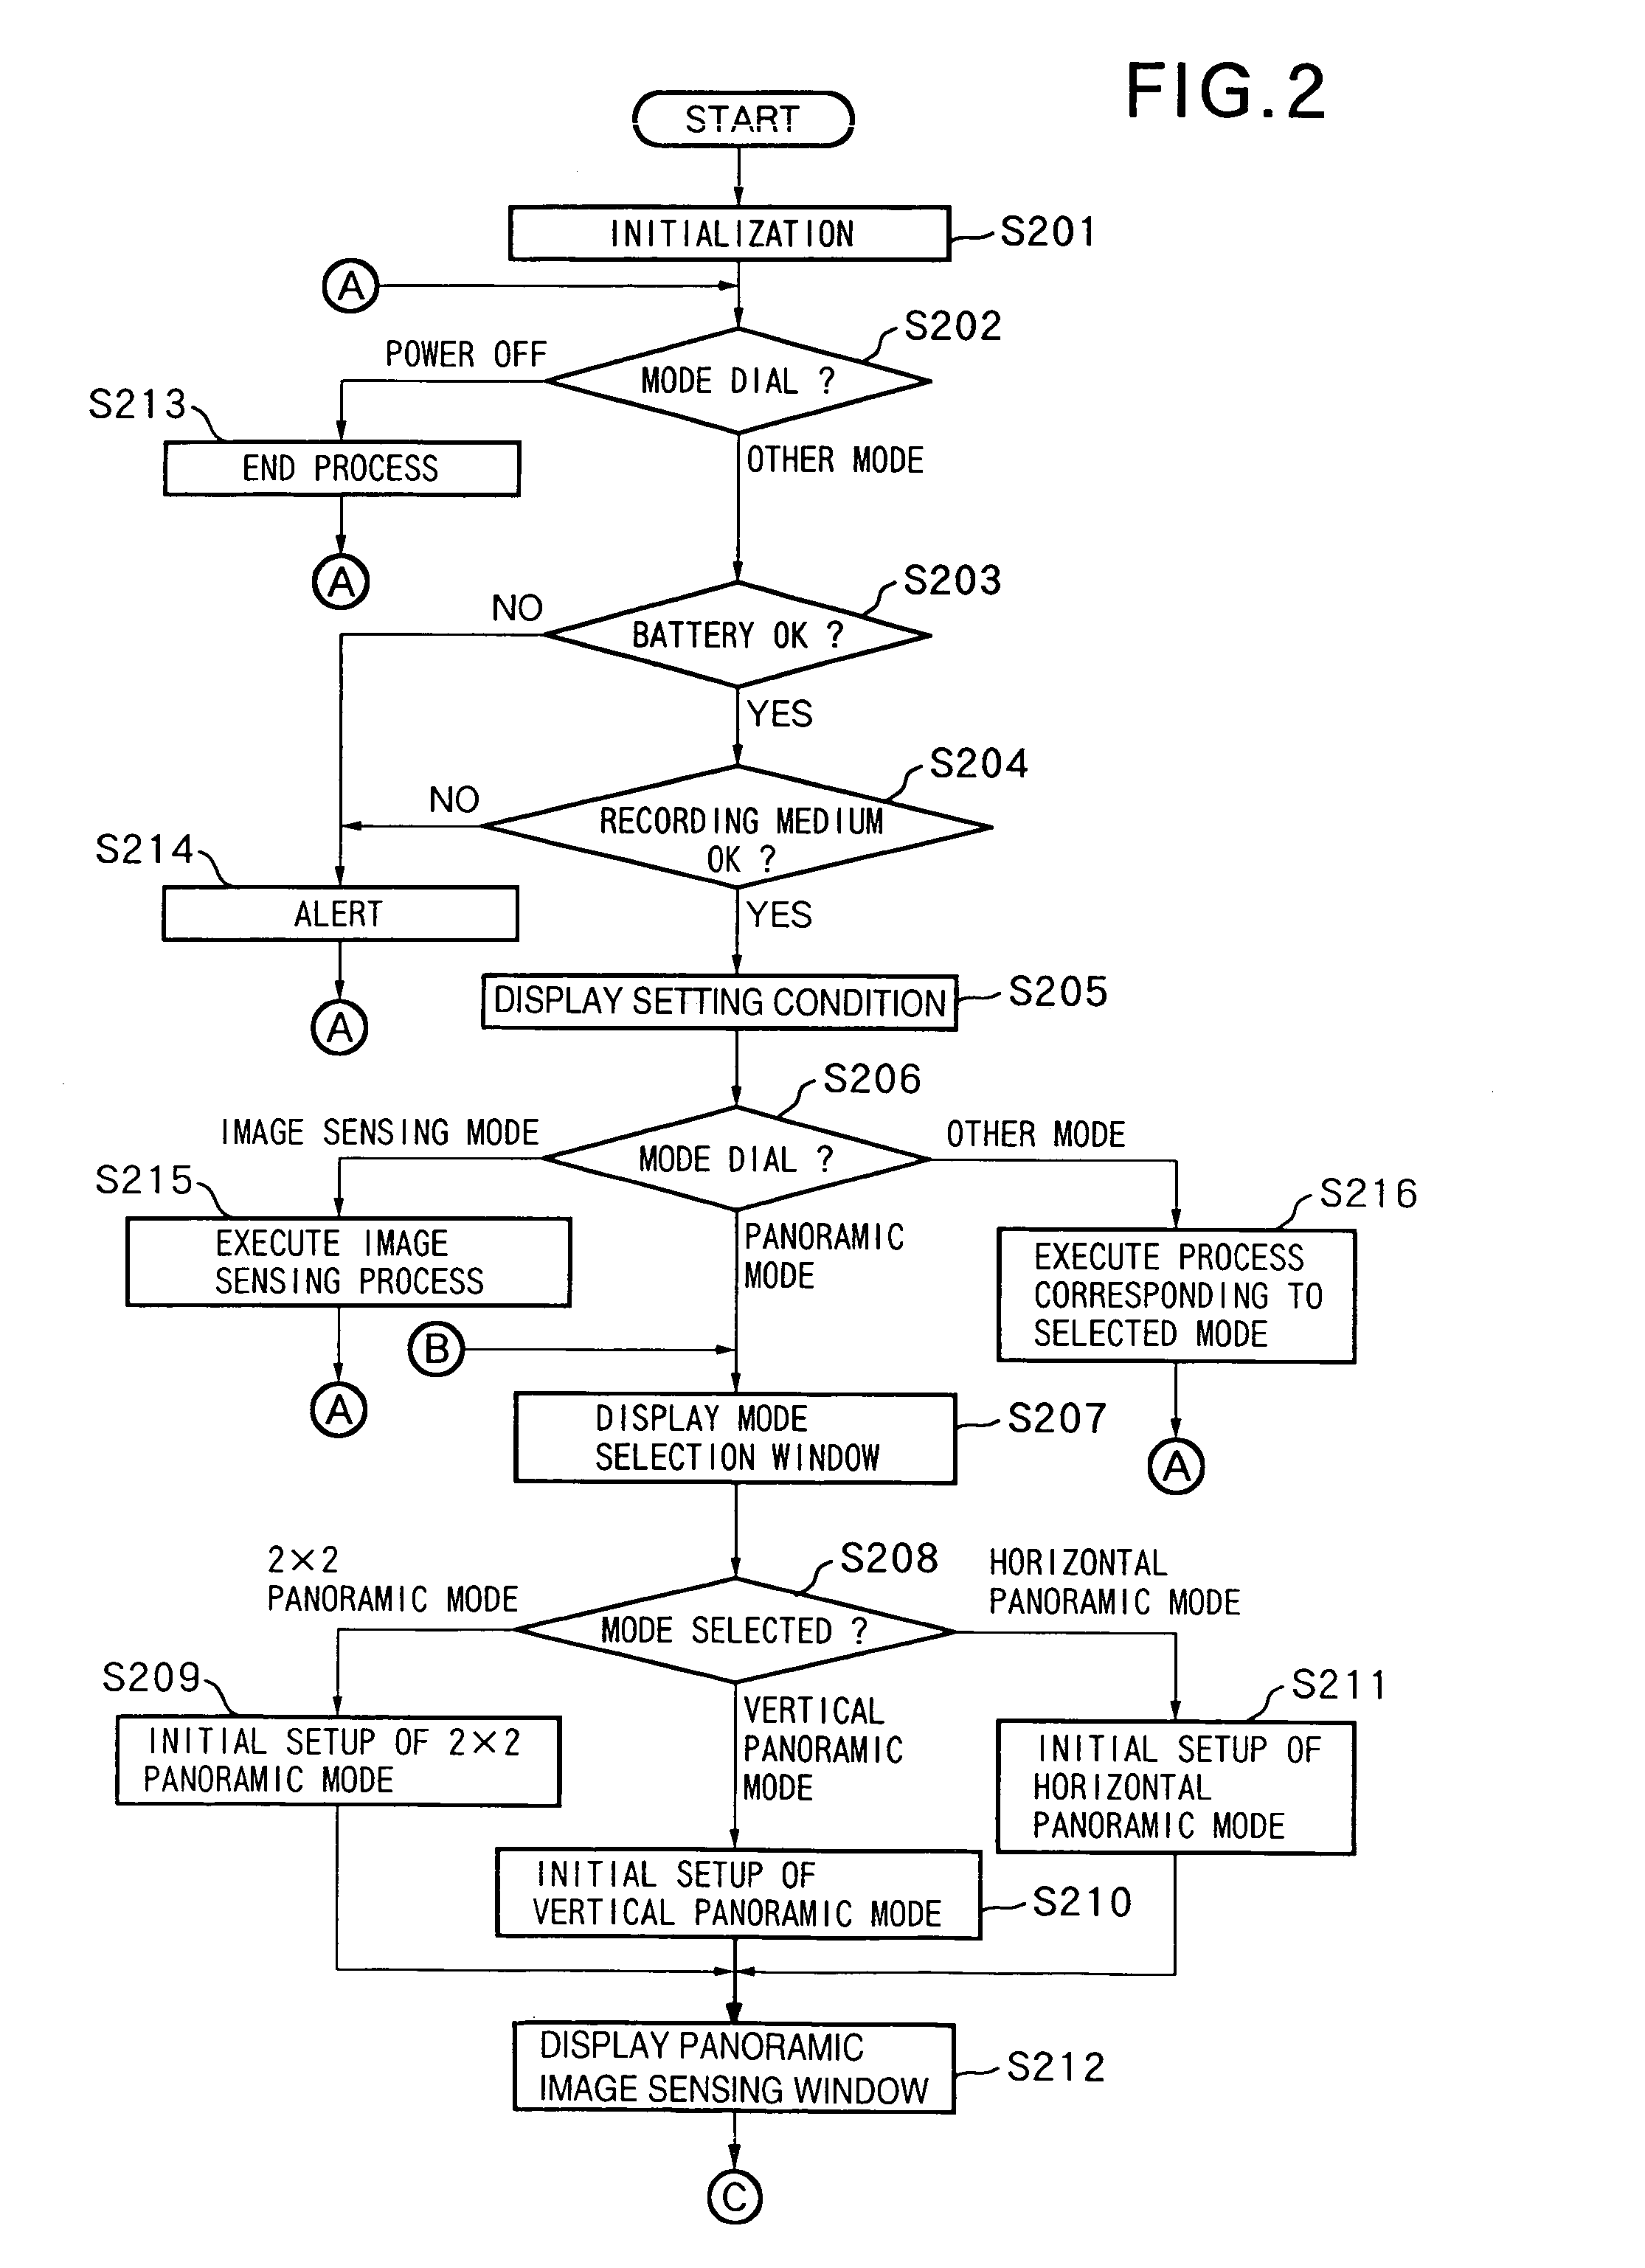 Image processing method and apparatus, control method therefor, and storage medium